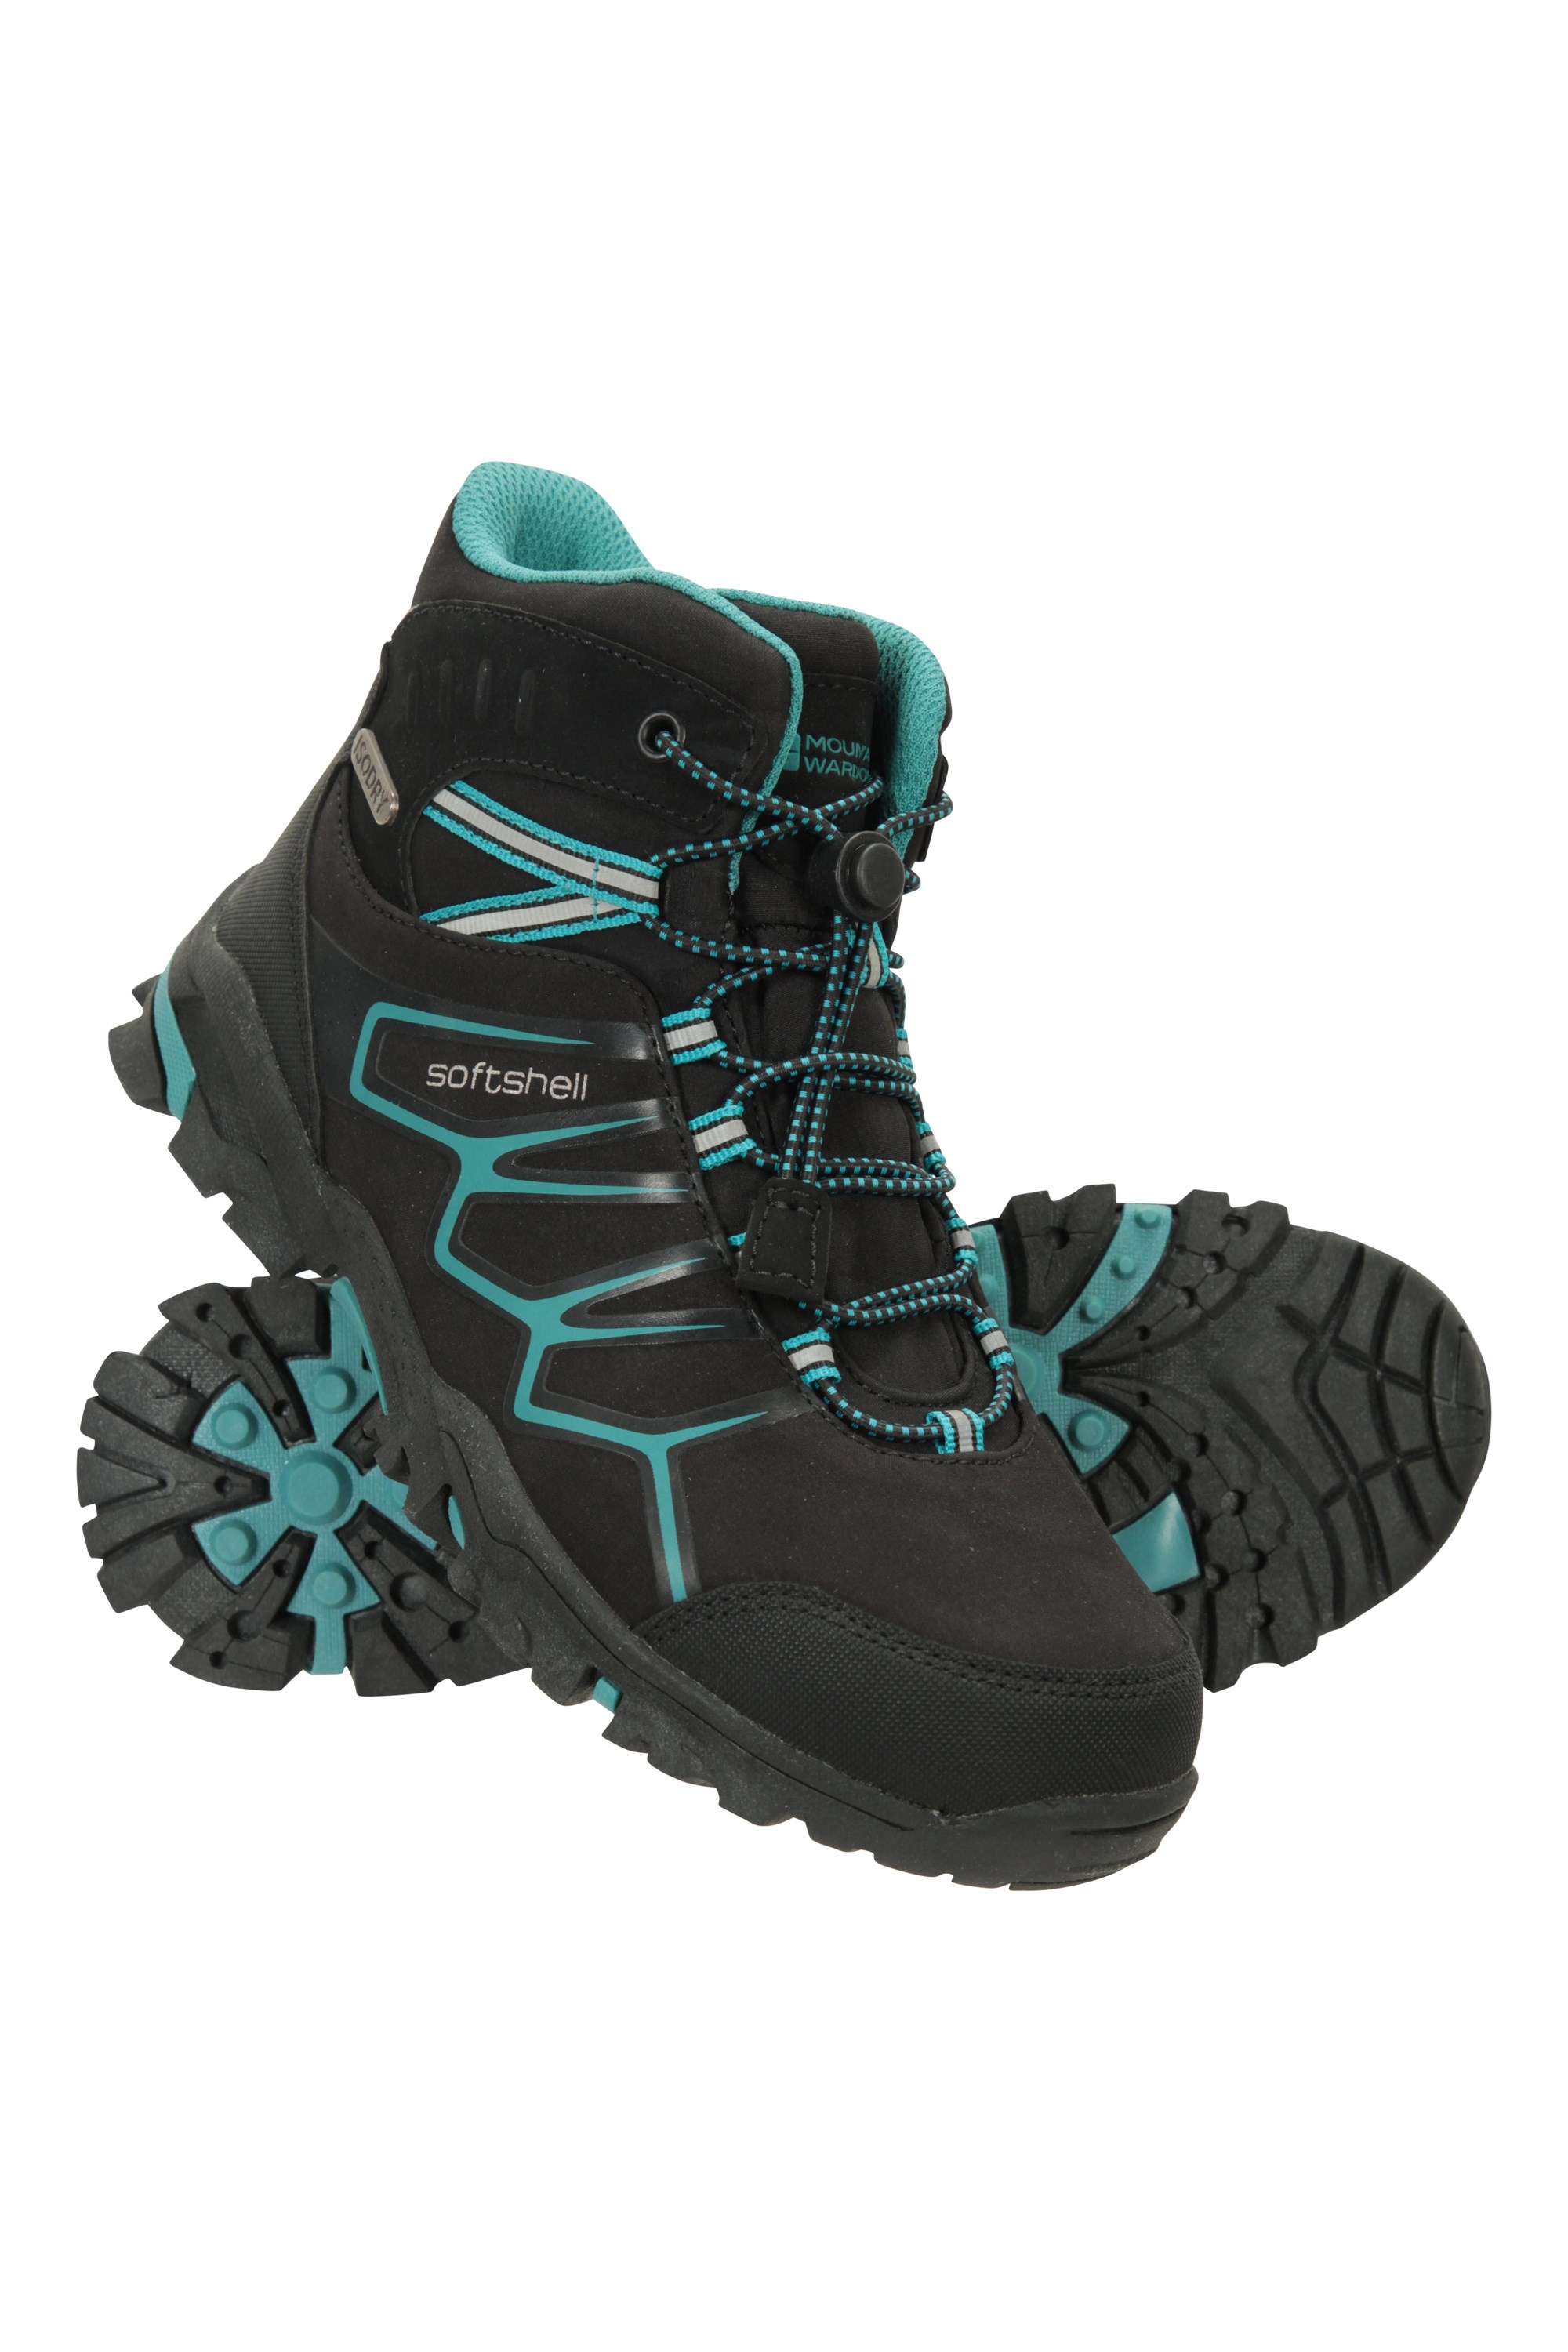 for Travelling Mountain Warehouse Lakeland Kids Hiking Boots